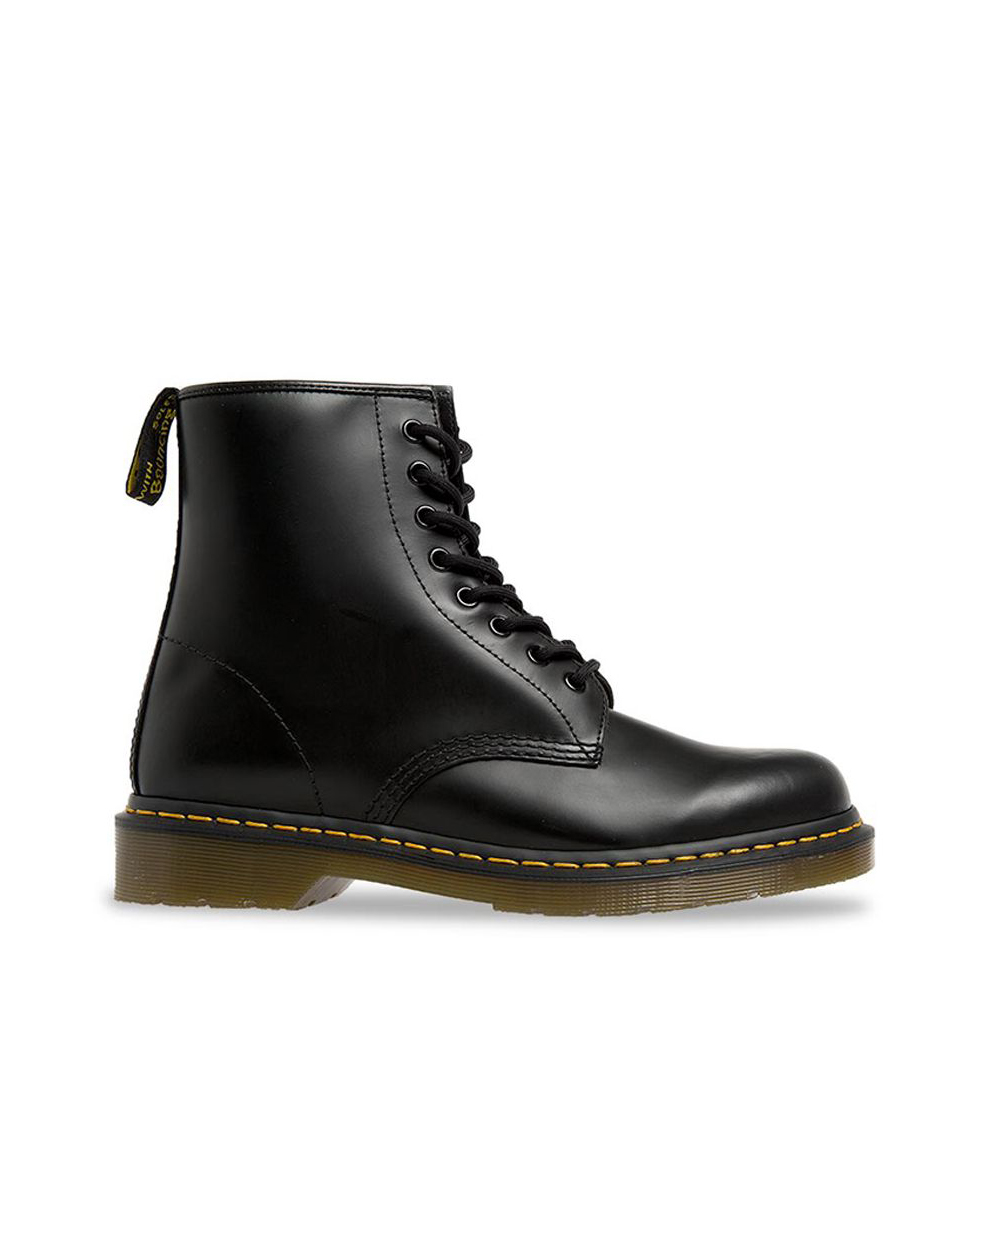 Dr Martin boots $249, from Platypus